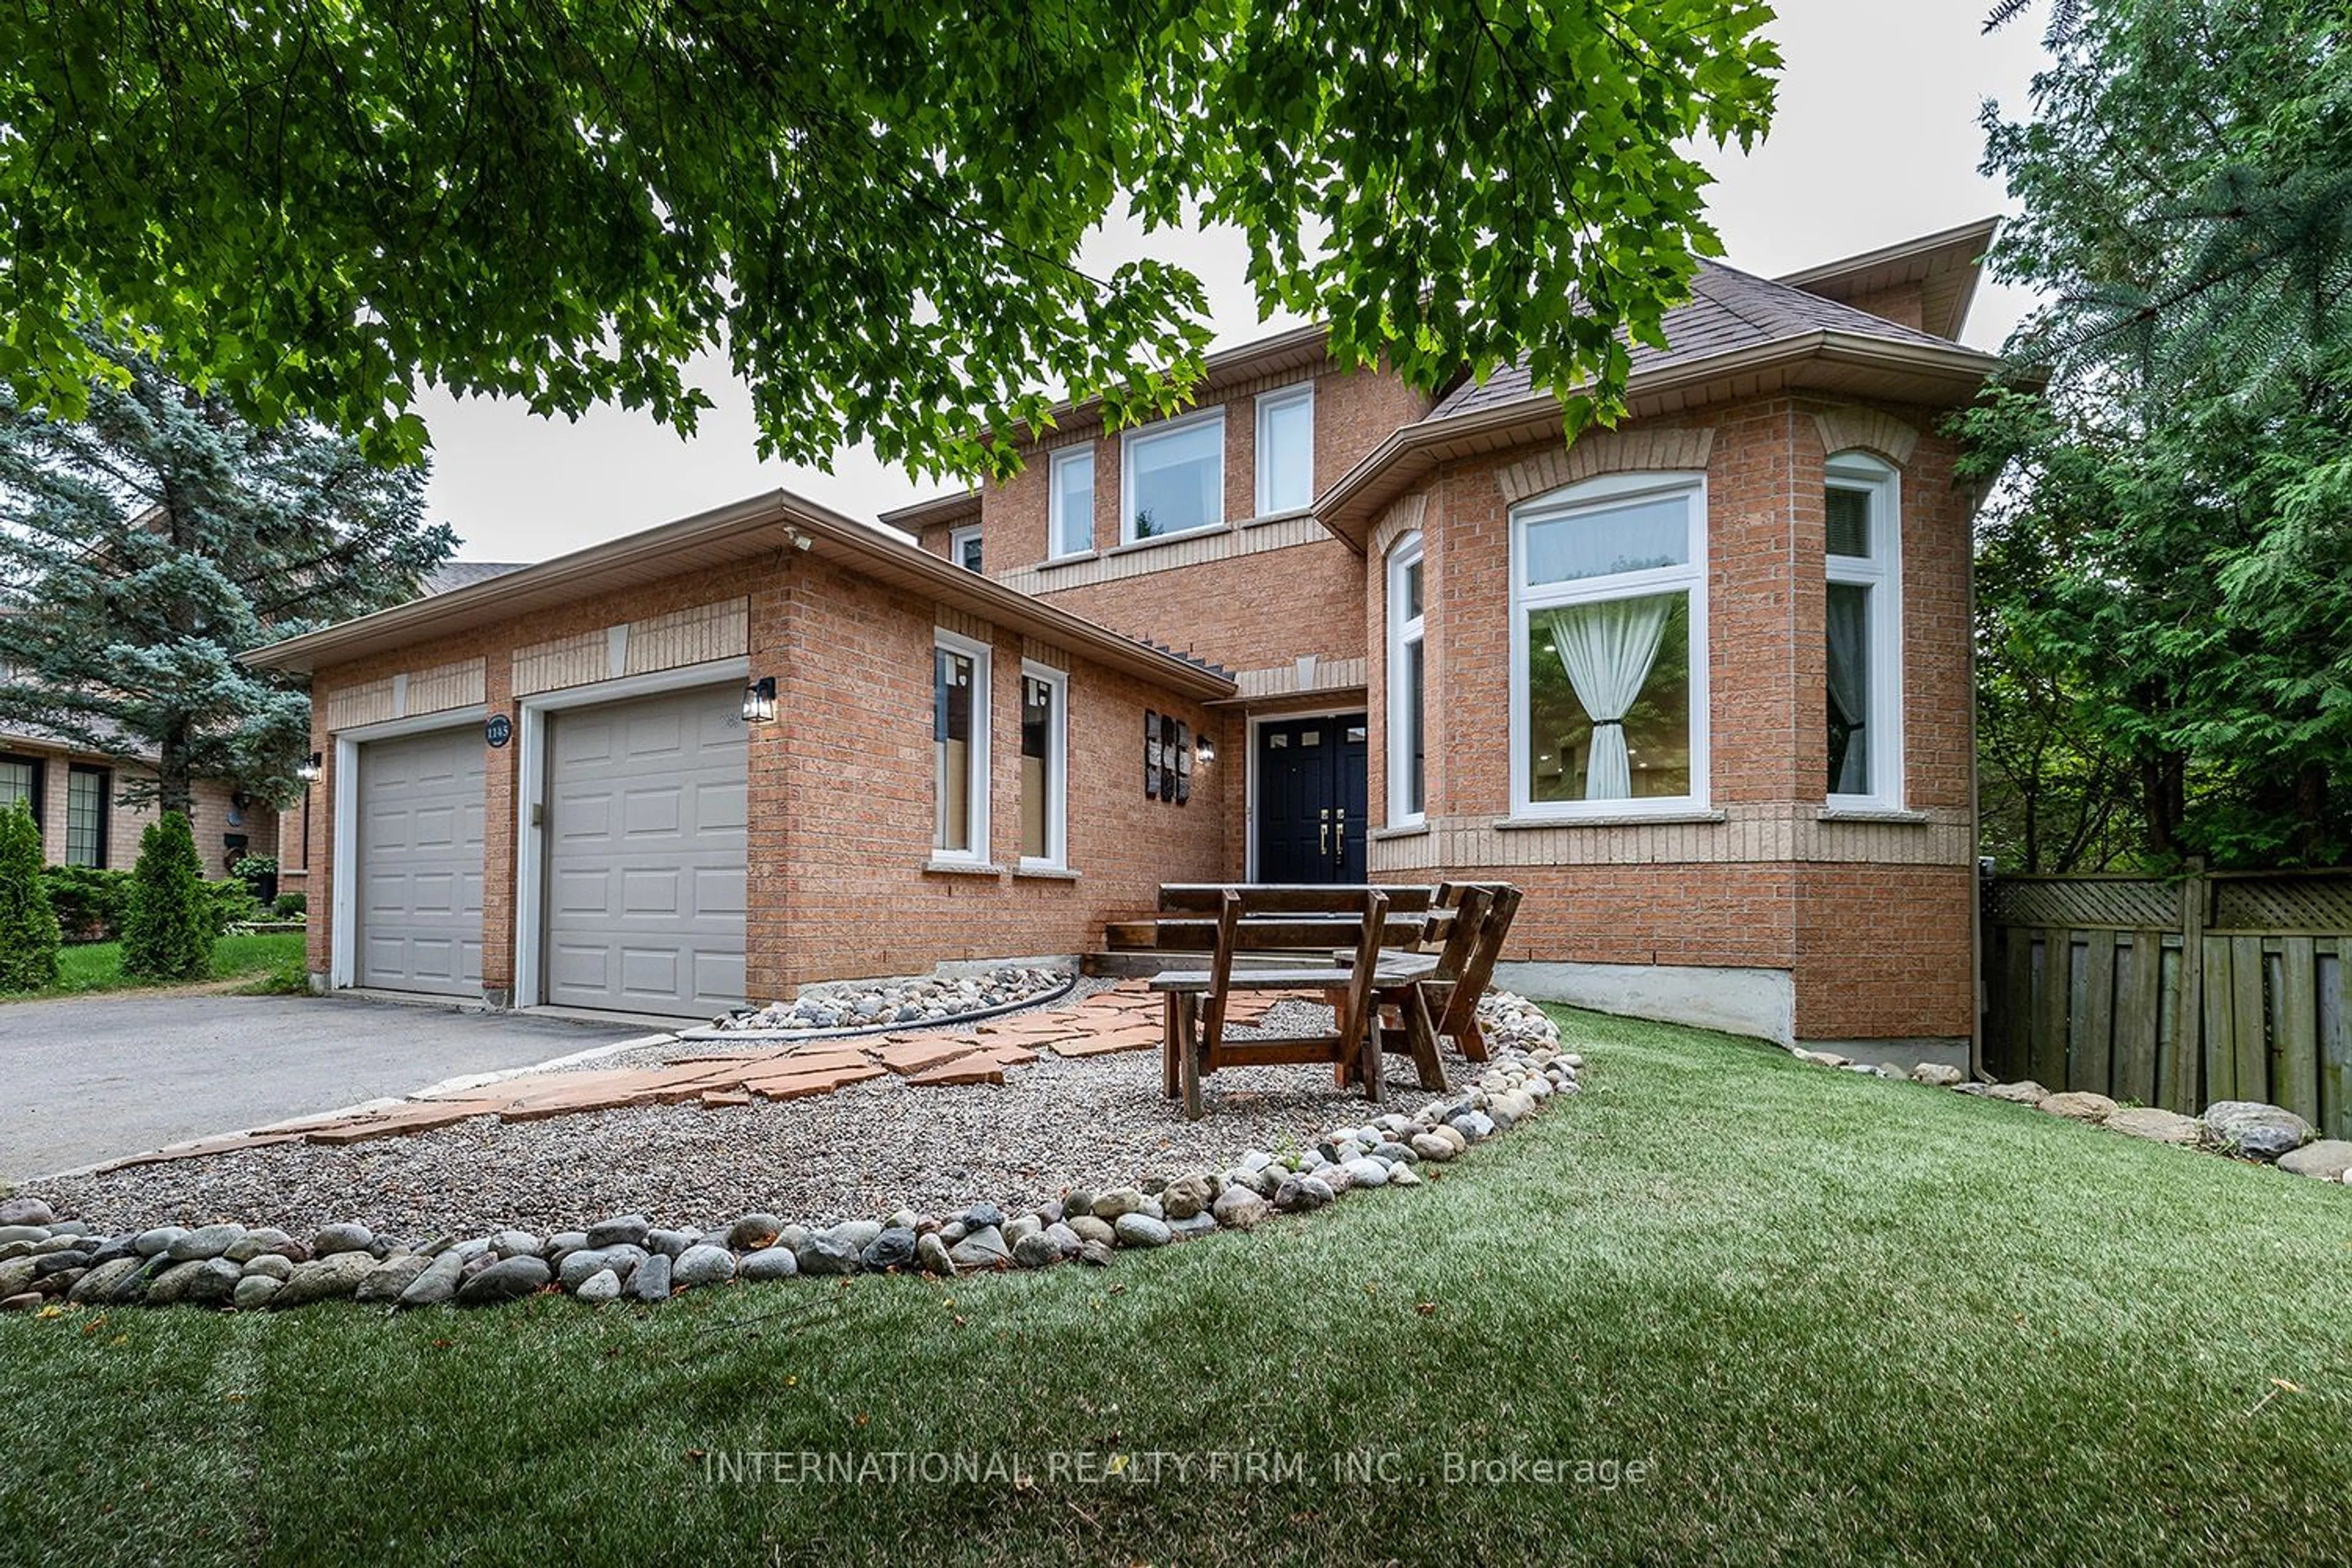 Home with brick exterior material for 1145 Gossamer Dr, Pickering Ontario L1X 2T8